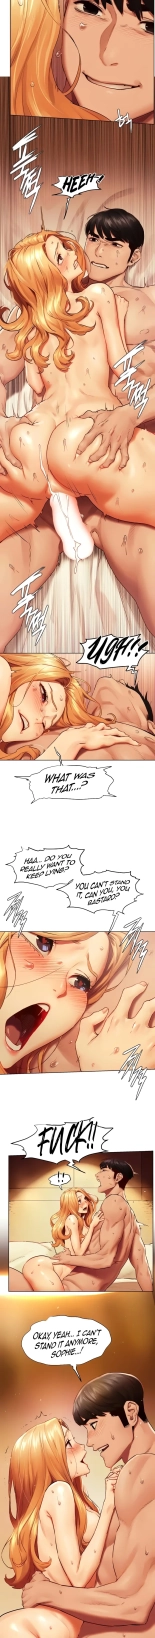 Sophie - tamed : page 17